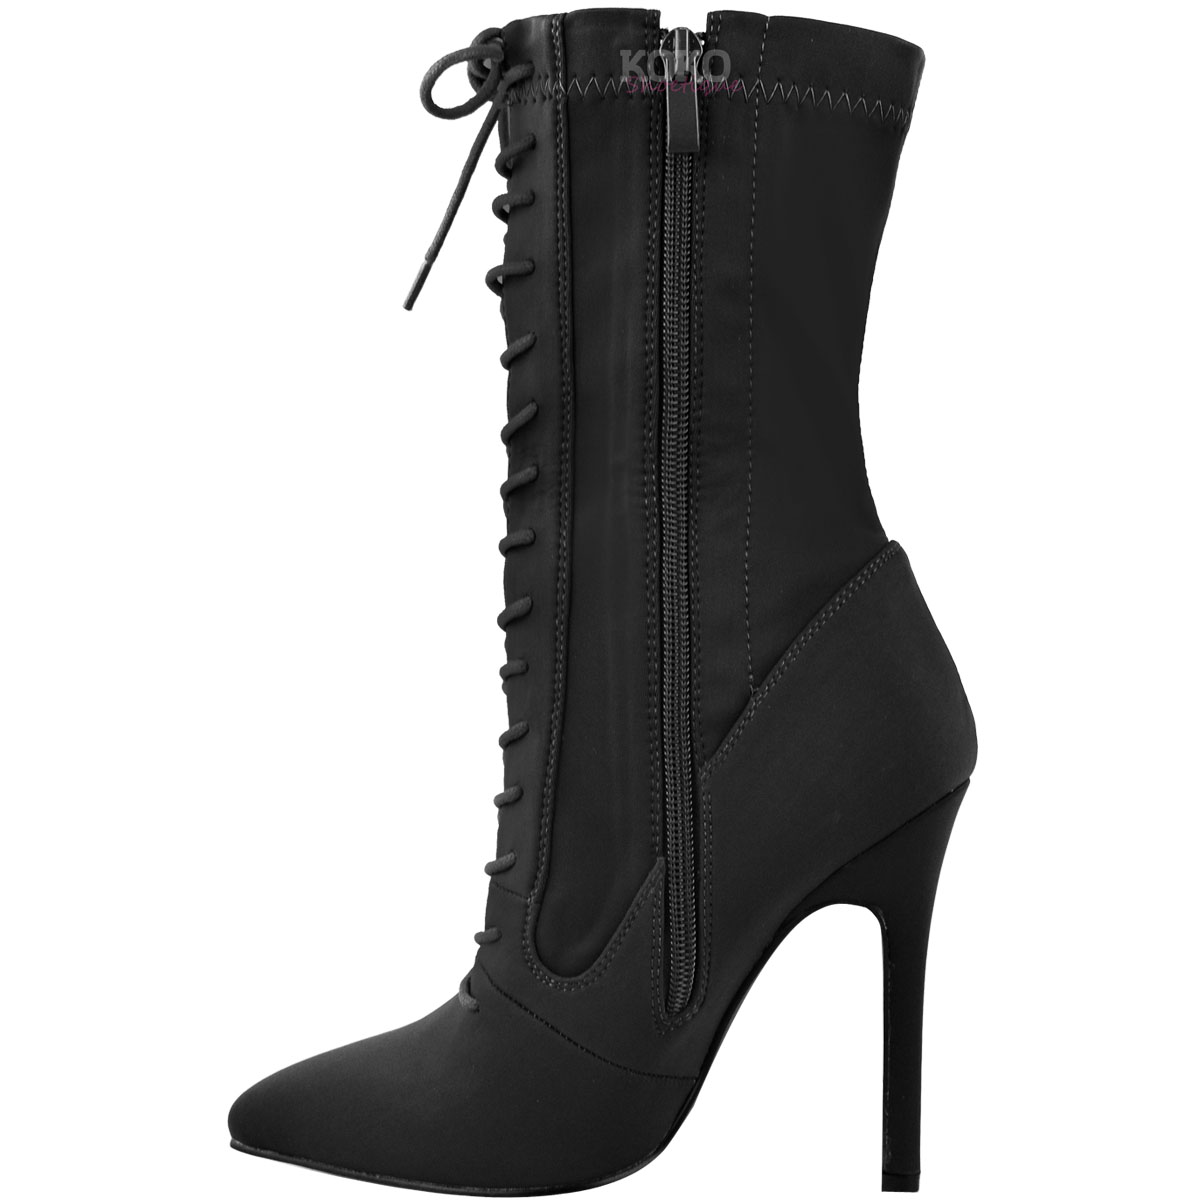 Womens Ladies Lace Up High Heel Stiletto Stretchy Lycra Ankle Boots ...